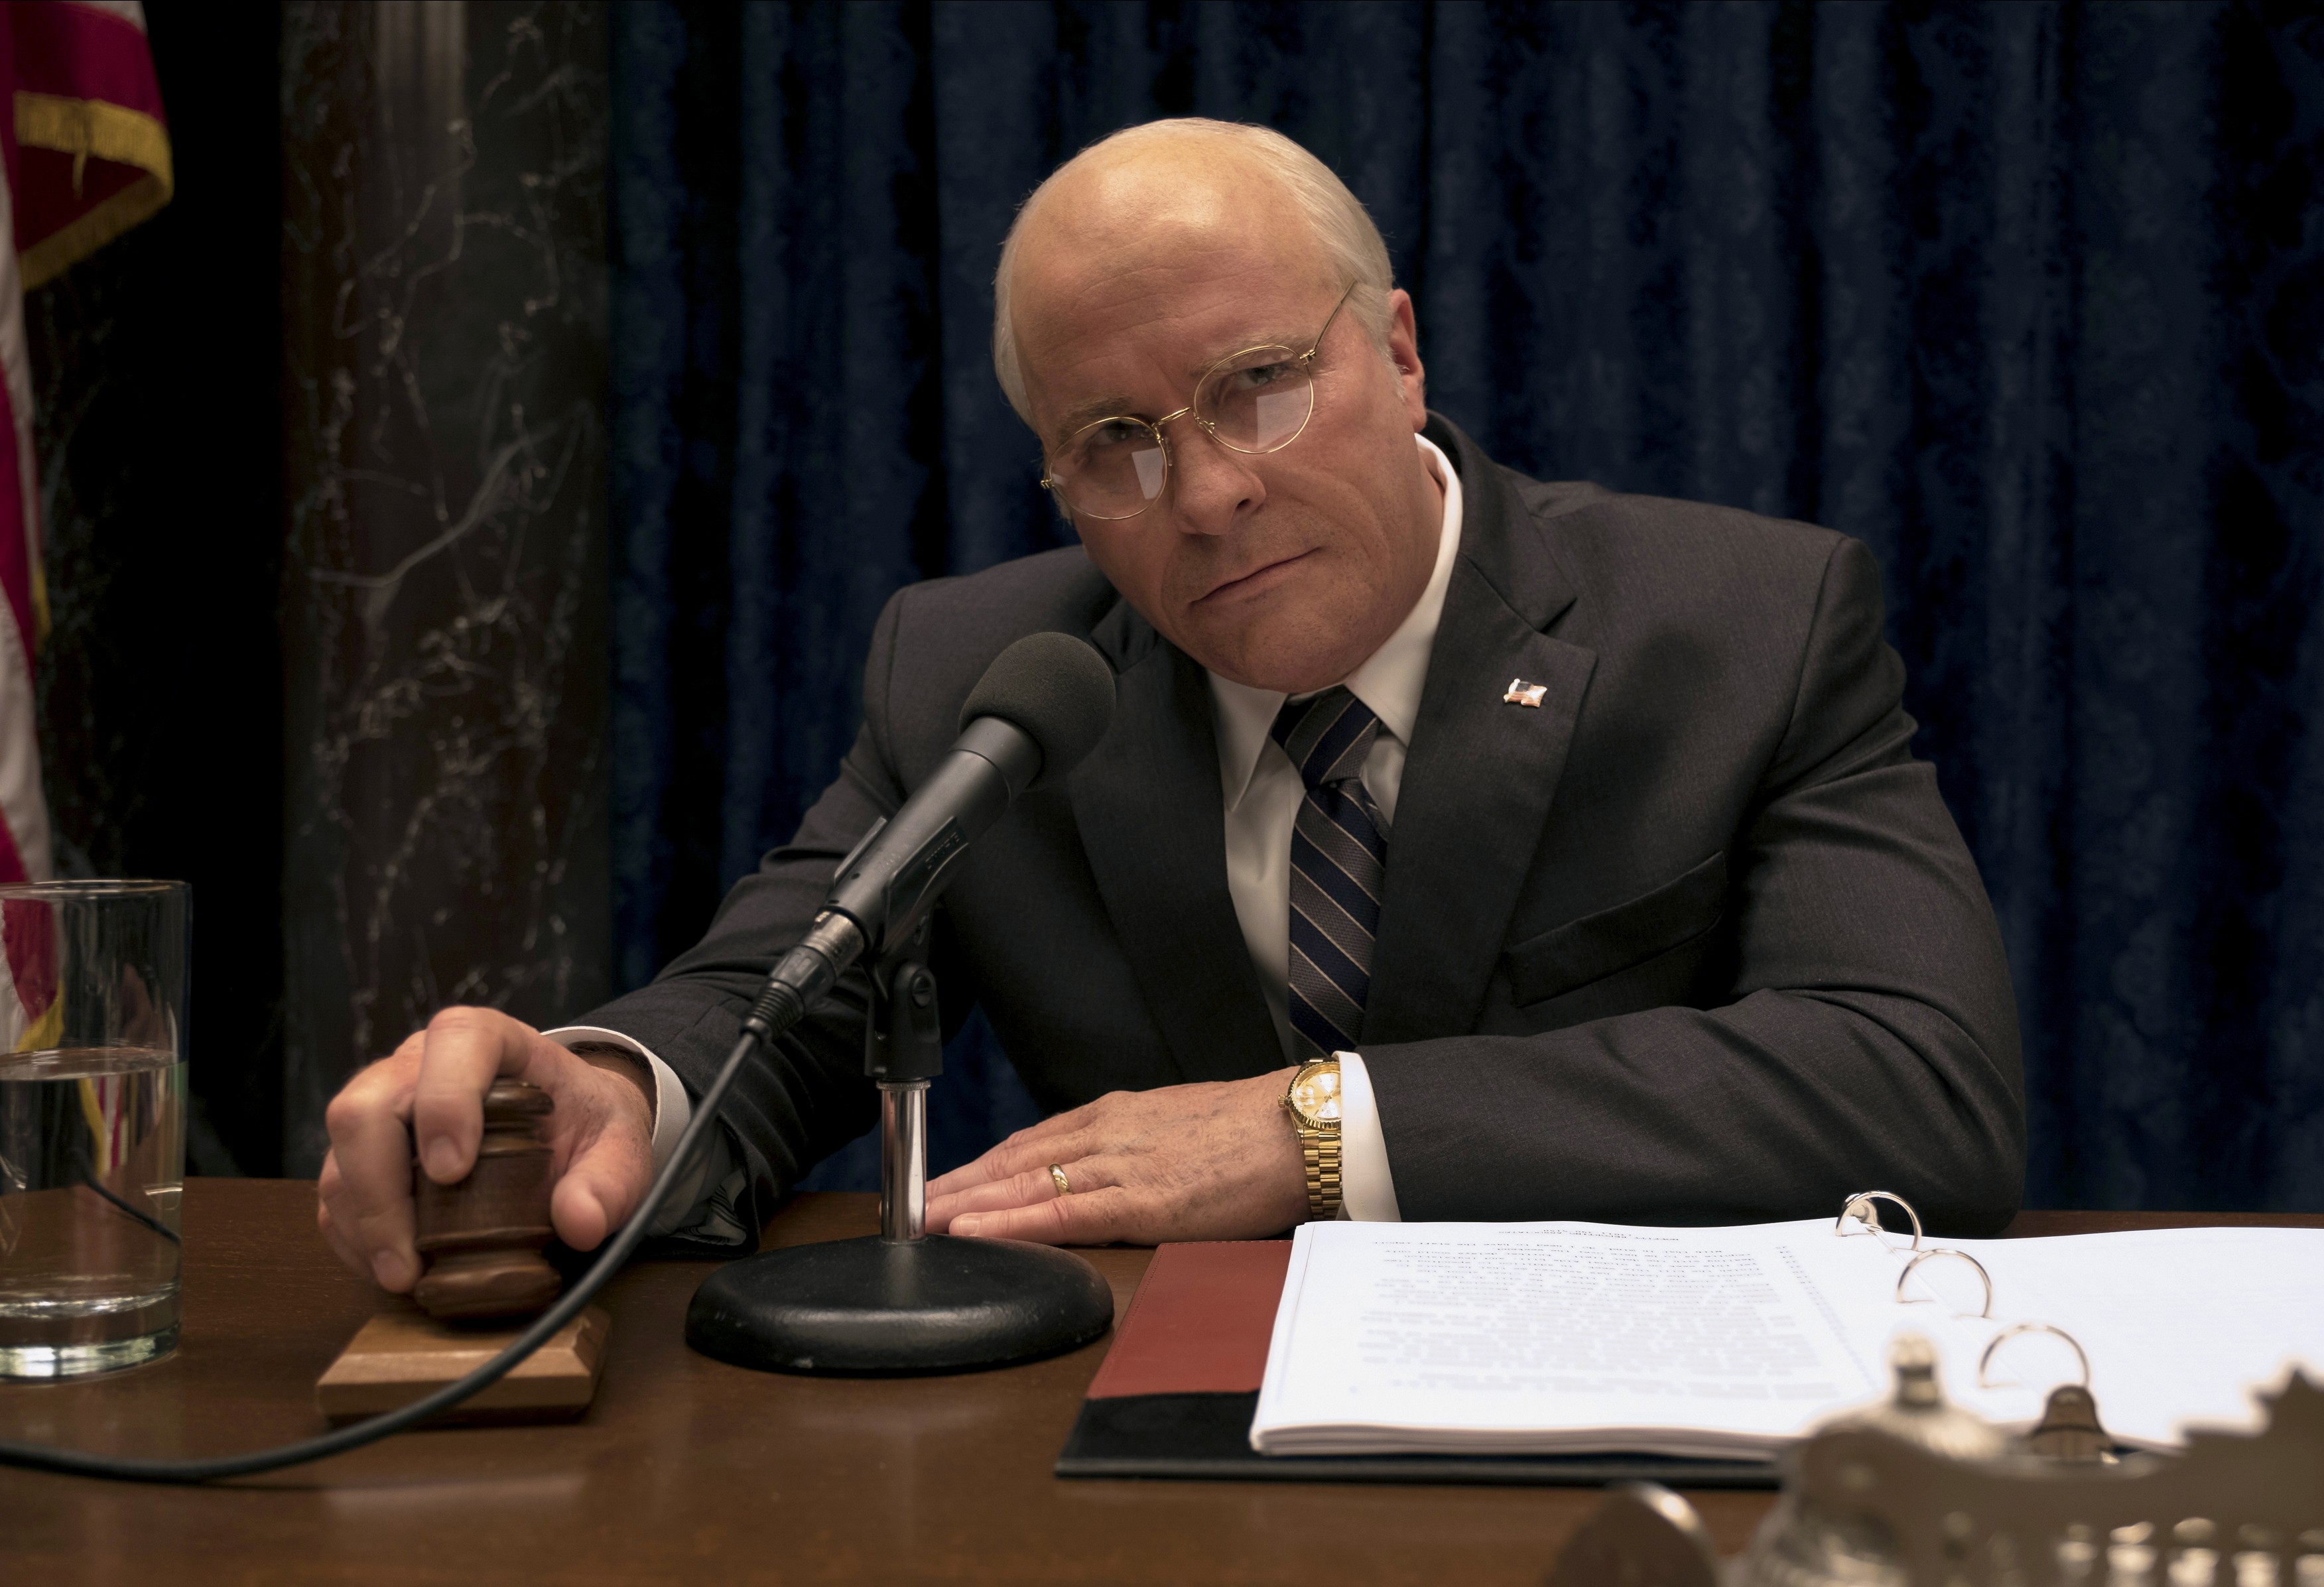 Christian Bale in Vice (Allstar/ANNAPURNA PICTURES)